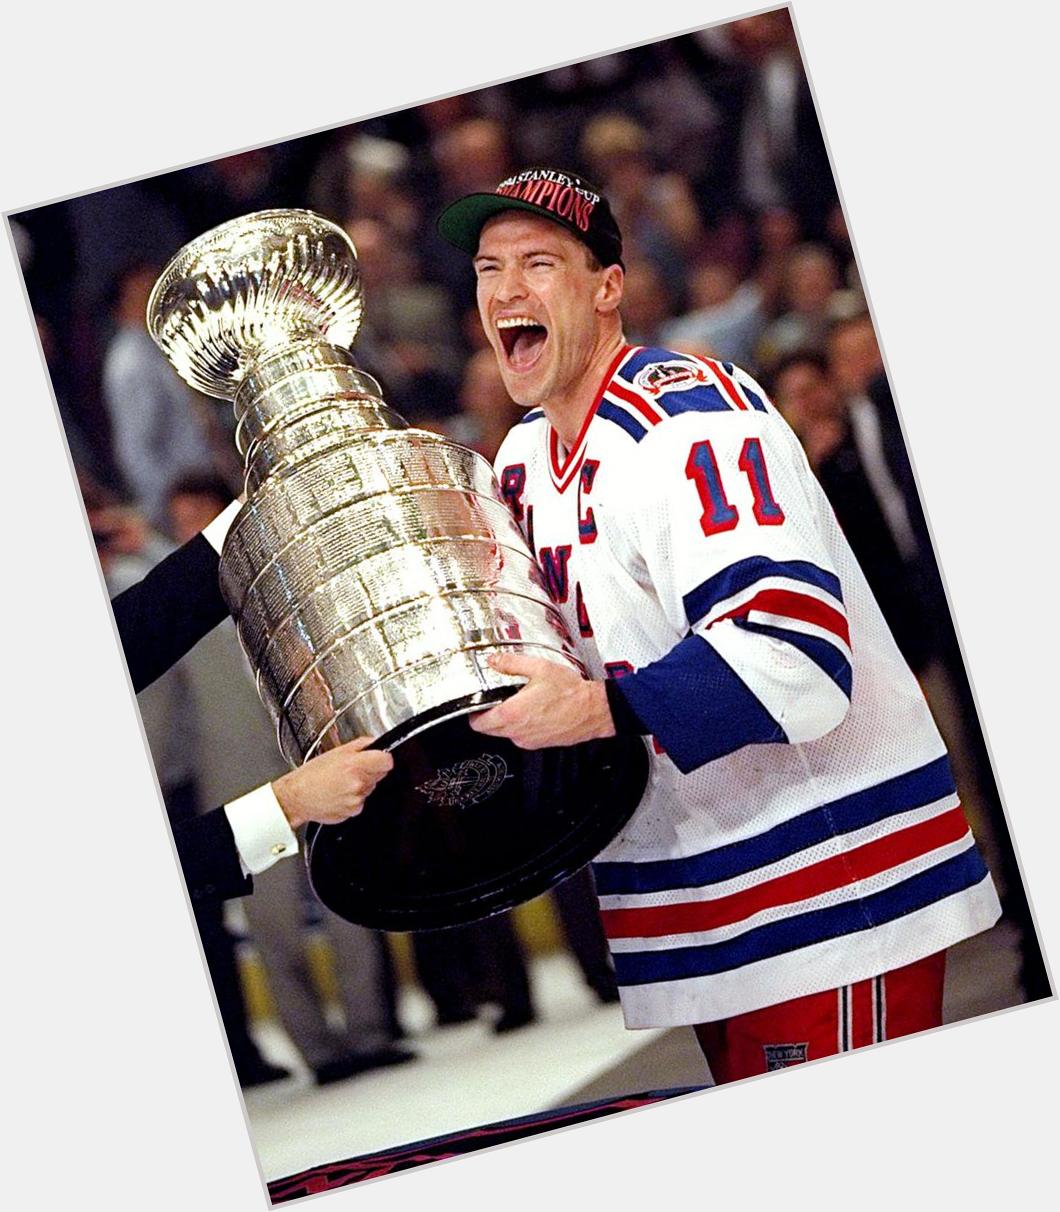 We would like to wish a very Happy Birthday to legend, the one & only Mark Messier!  